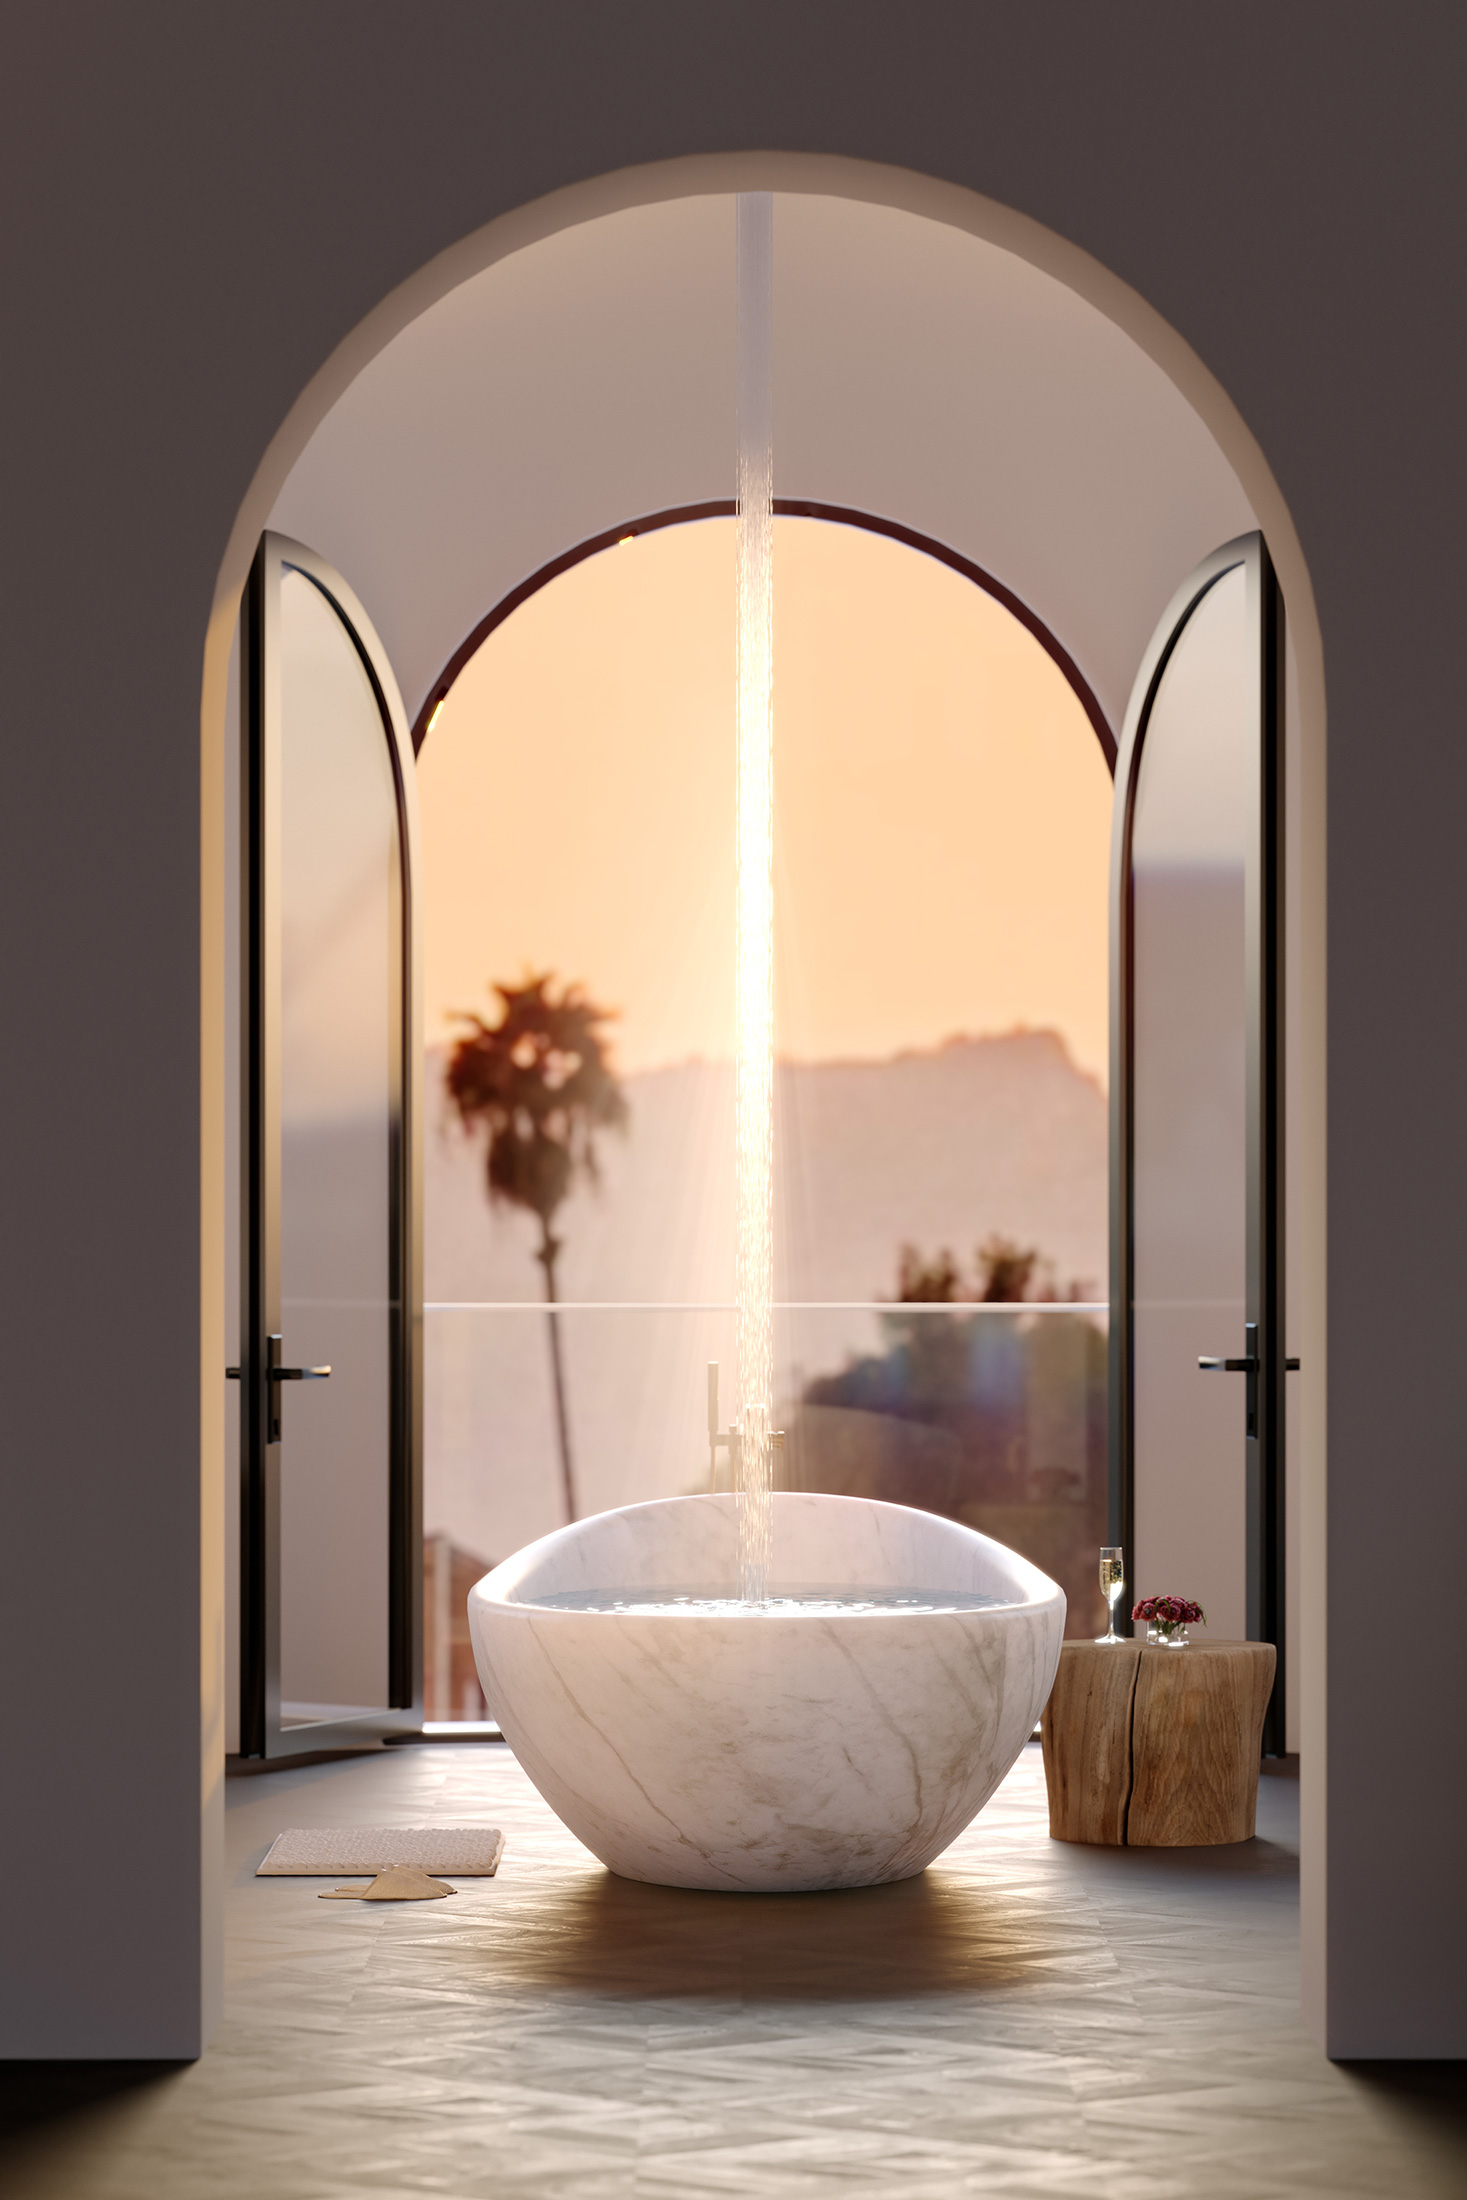 Architectural Rendering of the bathroom of the 10697 Somma Way project located in Los Angeles, California